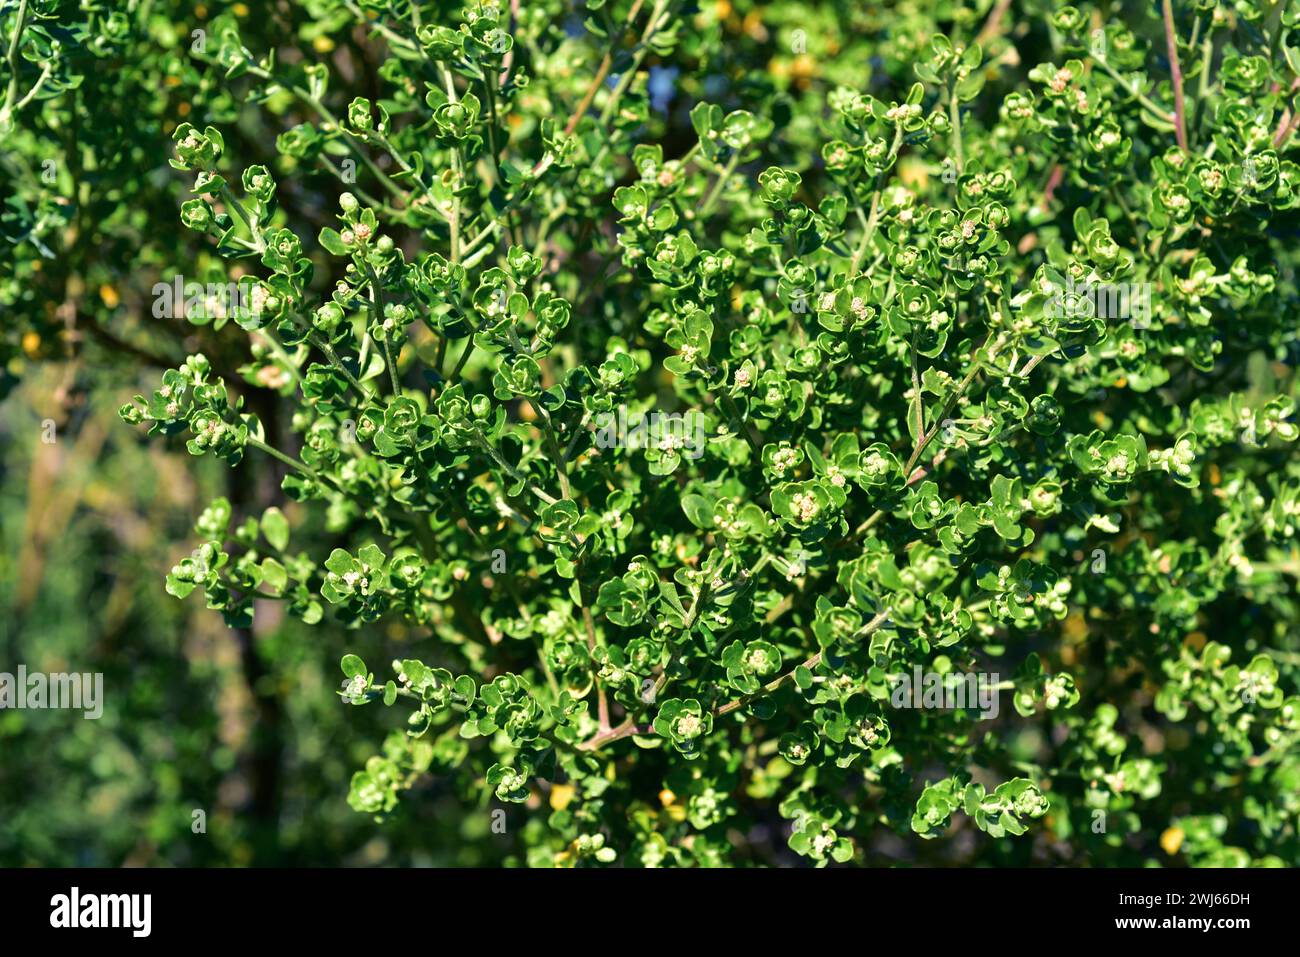 Vautro or gaultro (Baccharis concava) is a perennial shrub native to Chile. Flowers and leaves detail. Stock Photo